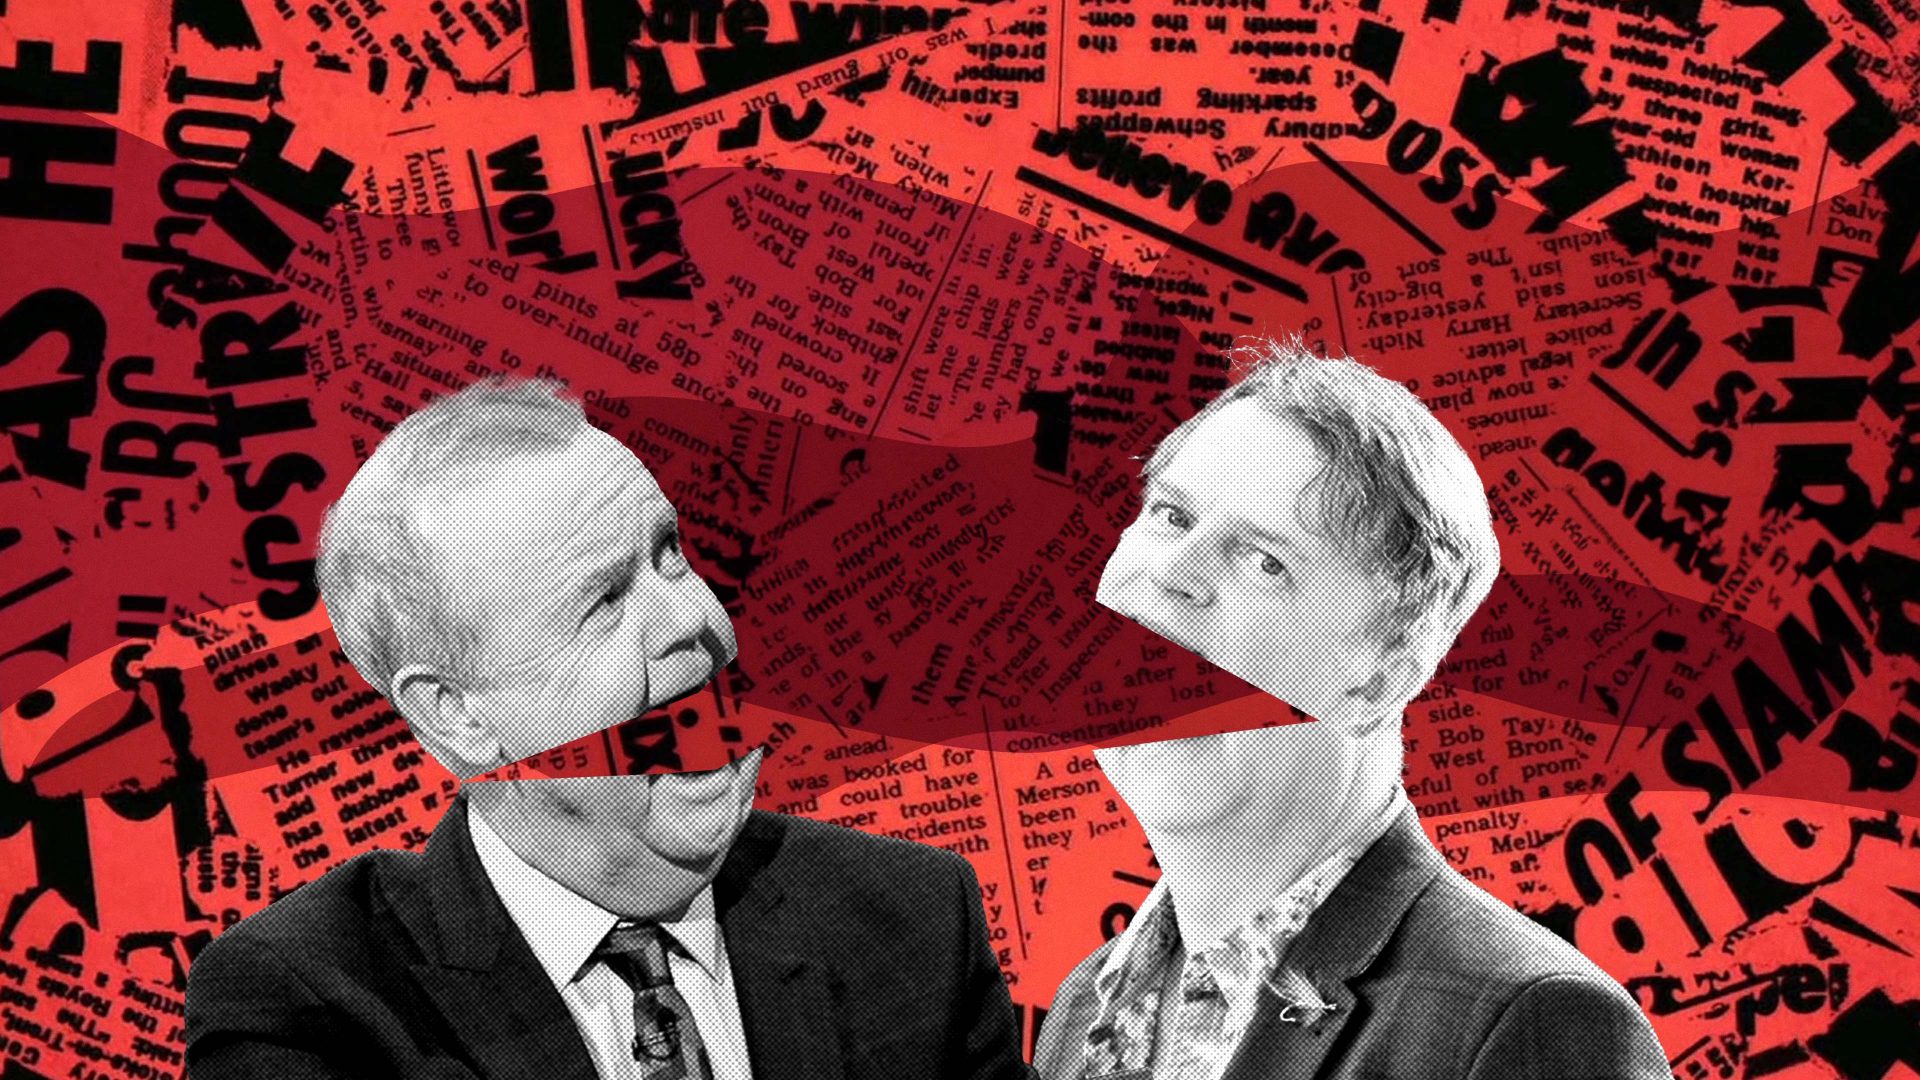 Ian Hislop, editor of Private Eye, and comedian Paul Merton, longtime regulars on Have I Got News for You. Image: TNE